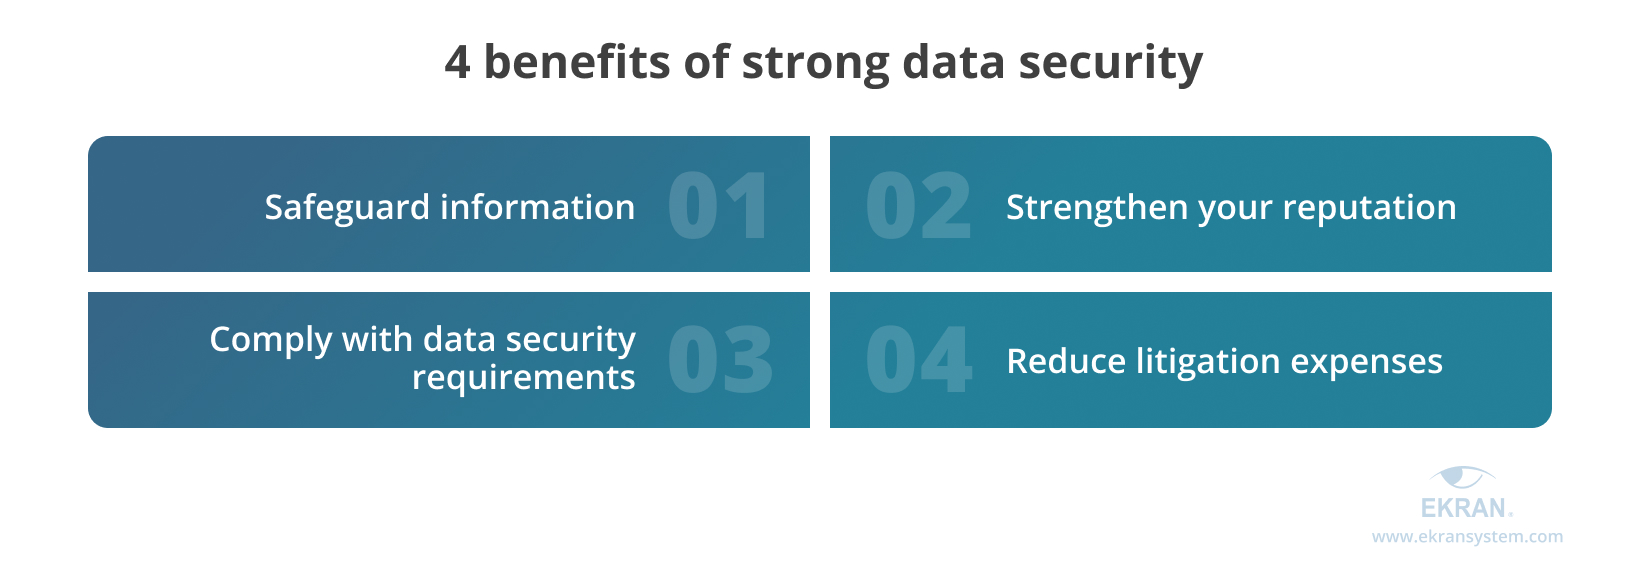 benefits of strong data security